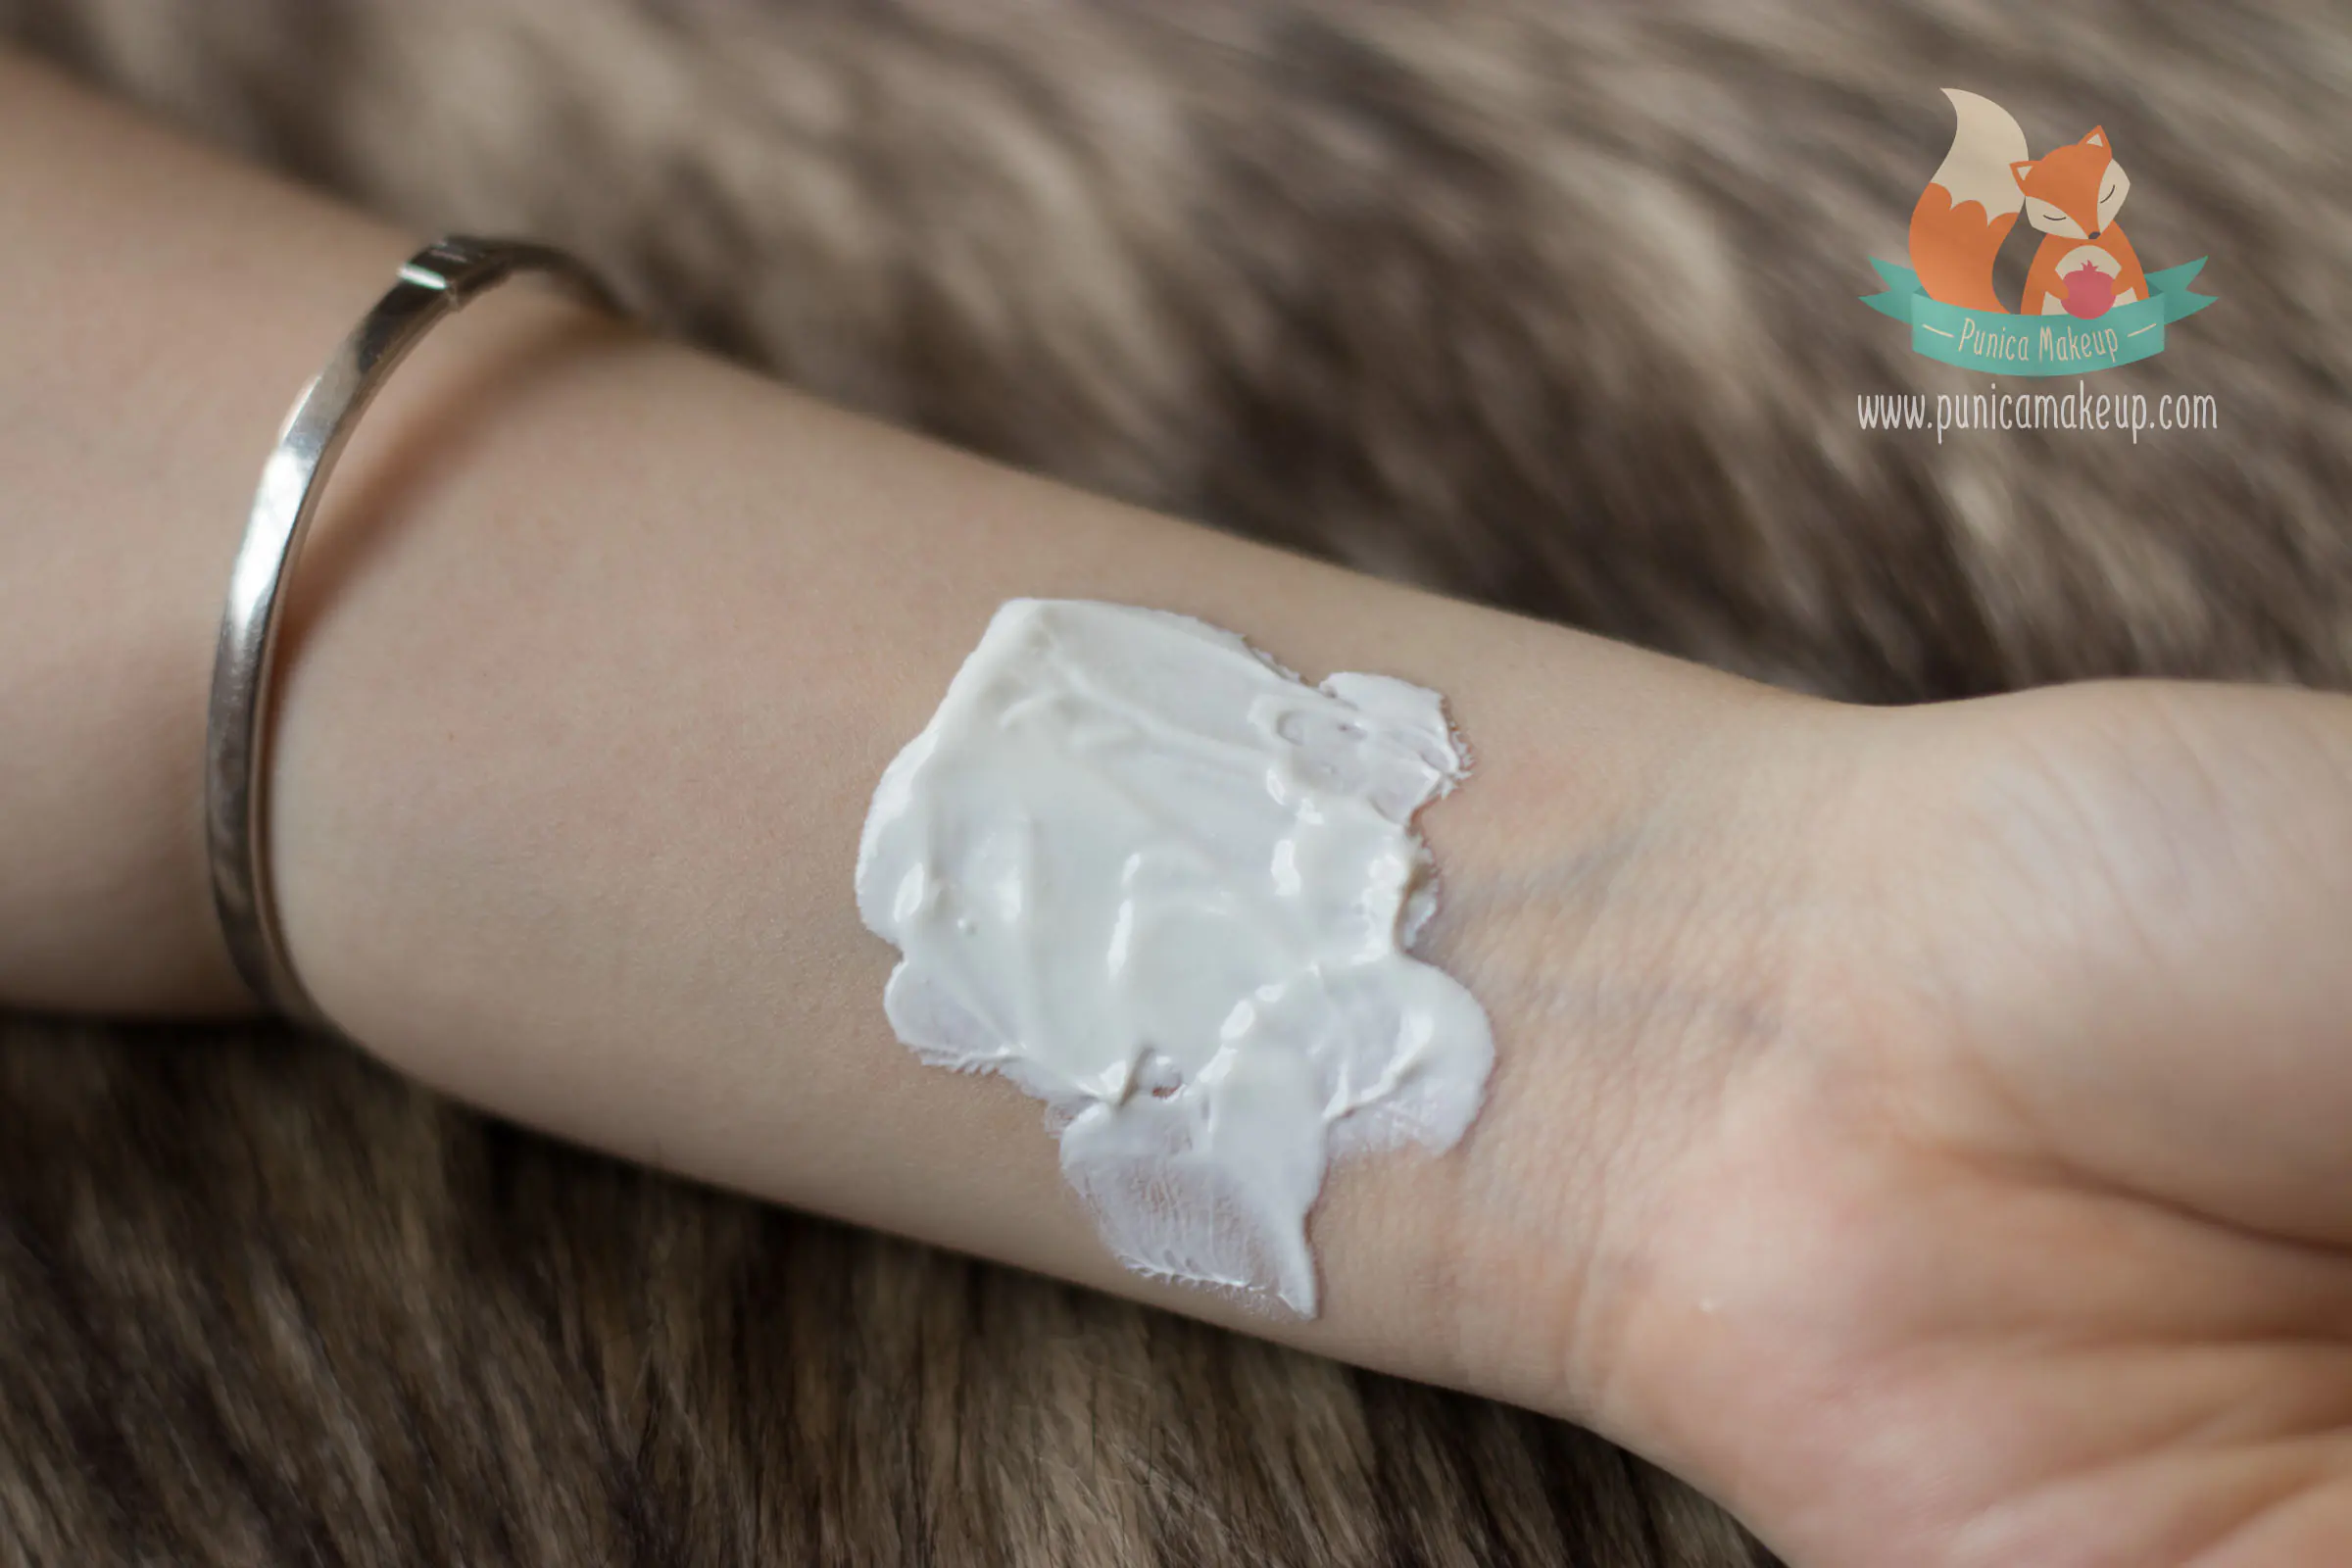 Juice Beauty SPF 30 Mineral Moisturizer Sheer tested on my hand